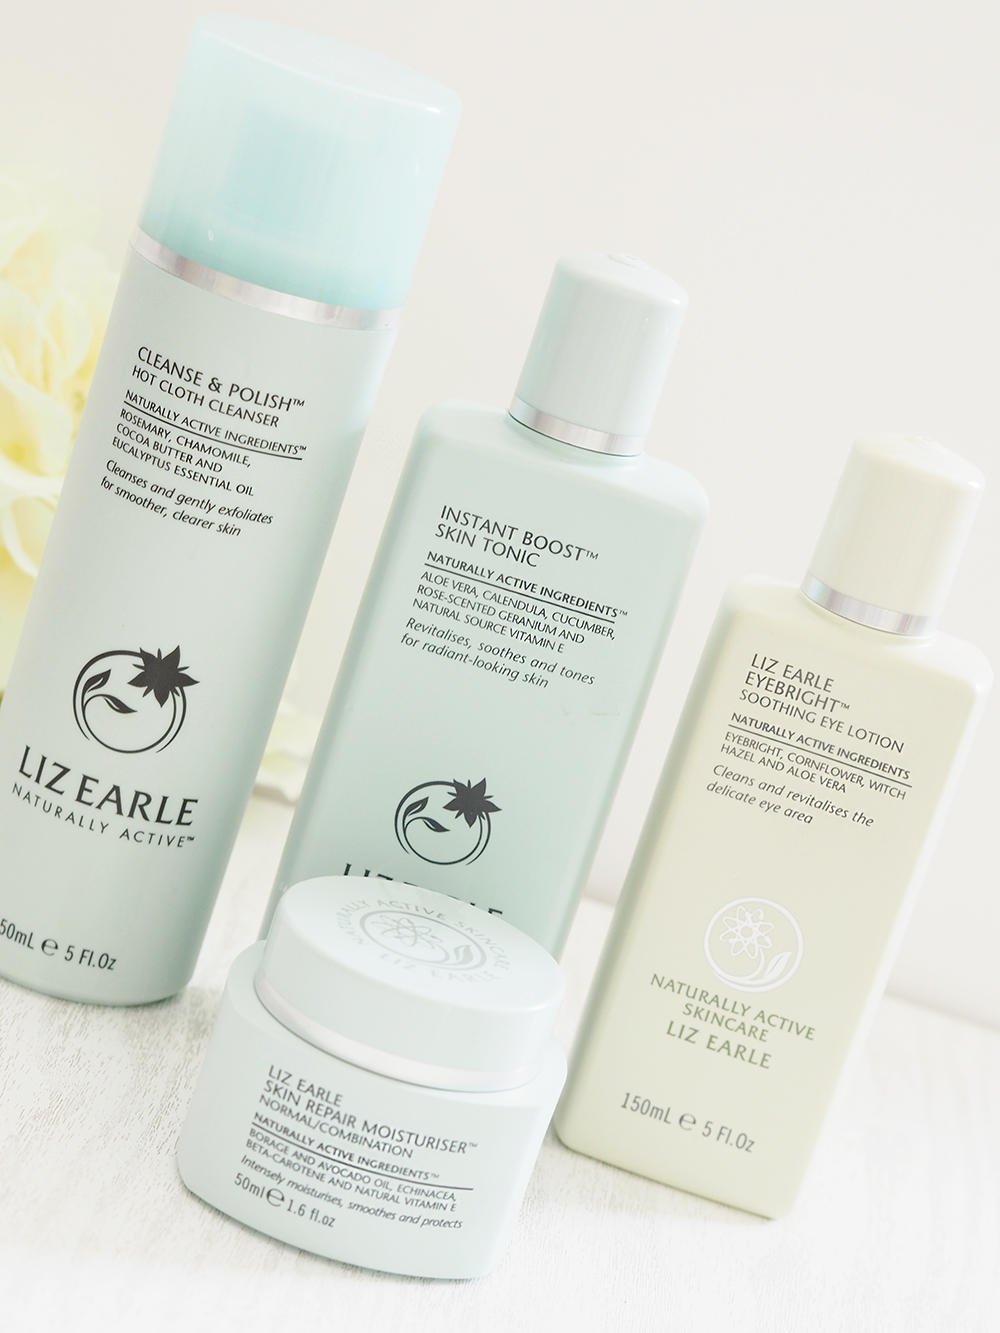 Liz Earle hot cloth cleanser review